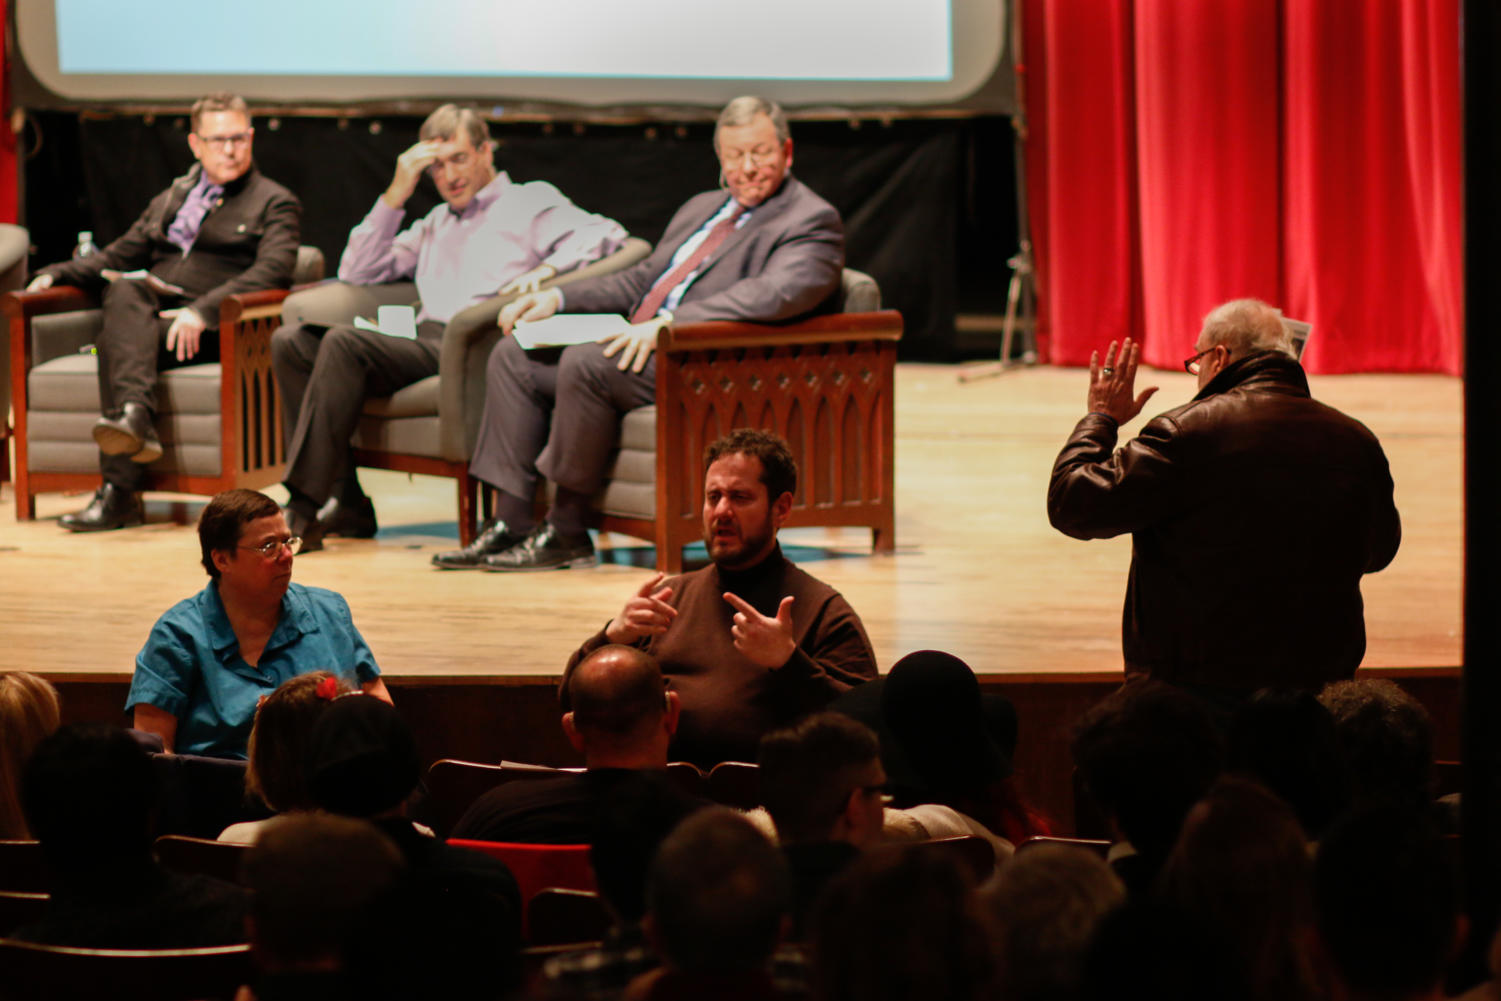 An audience member interrupts the panel discussion. After being chided by the moderator, he sits down.